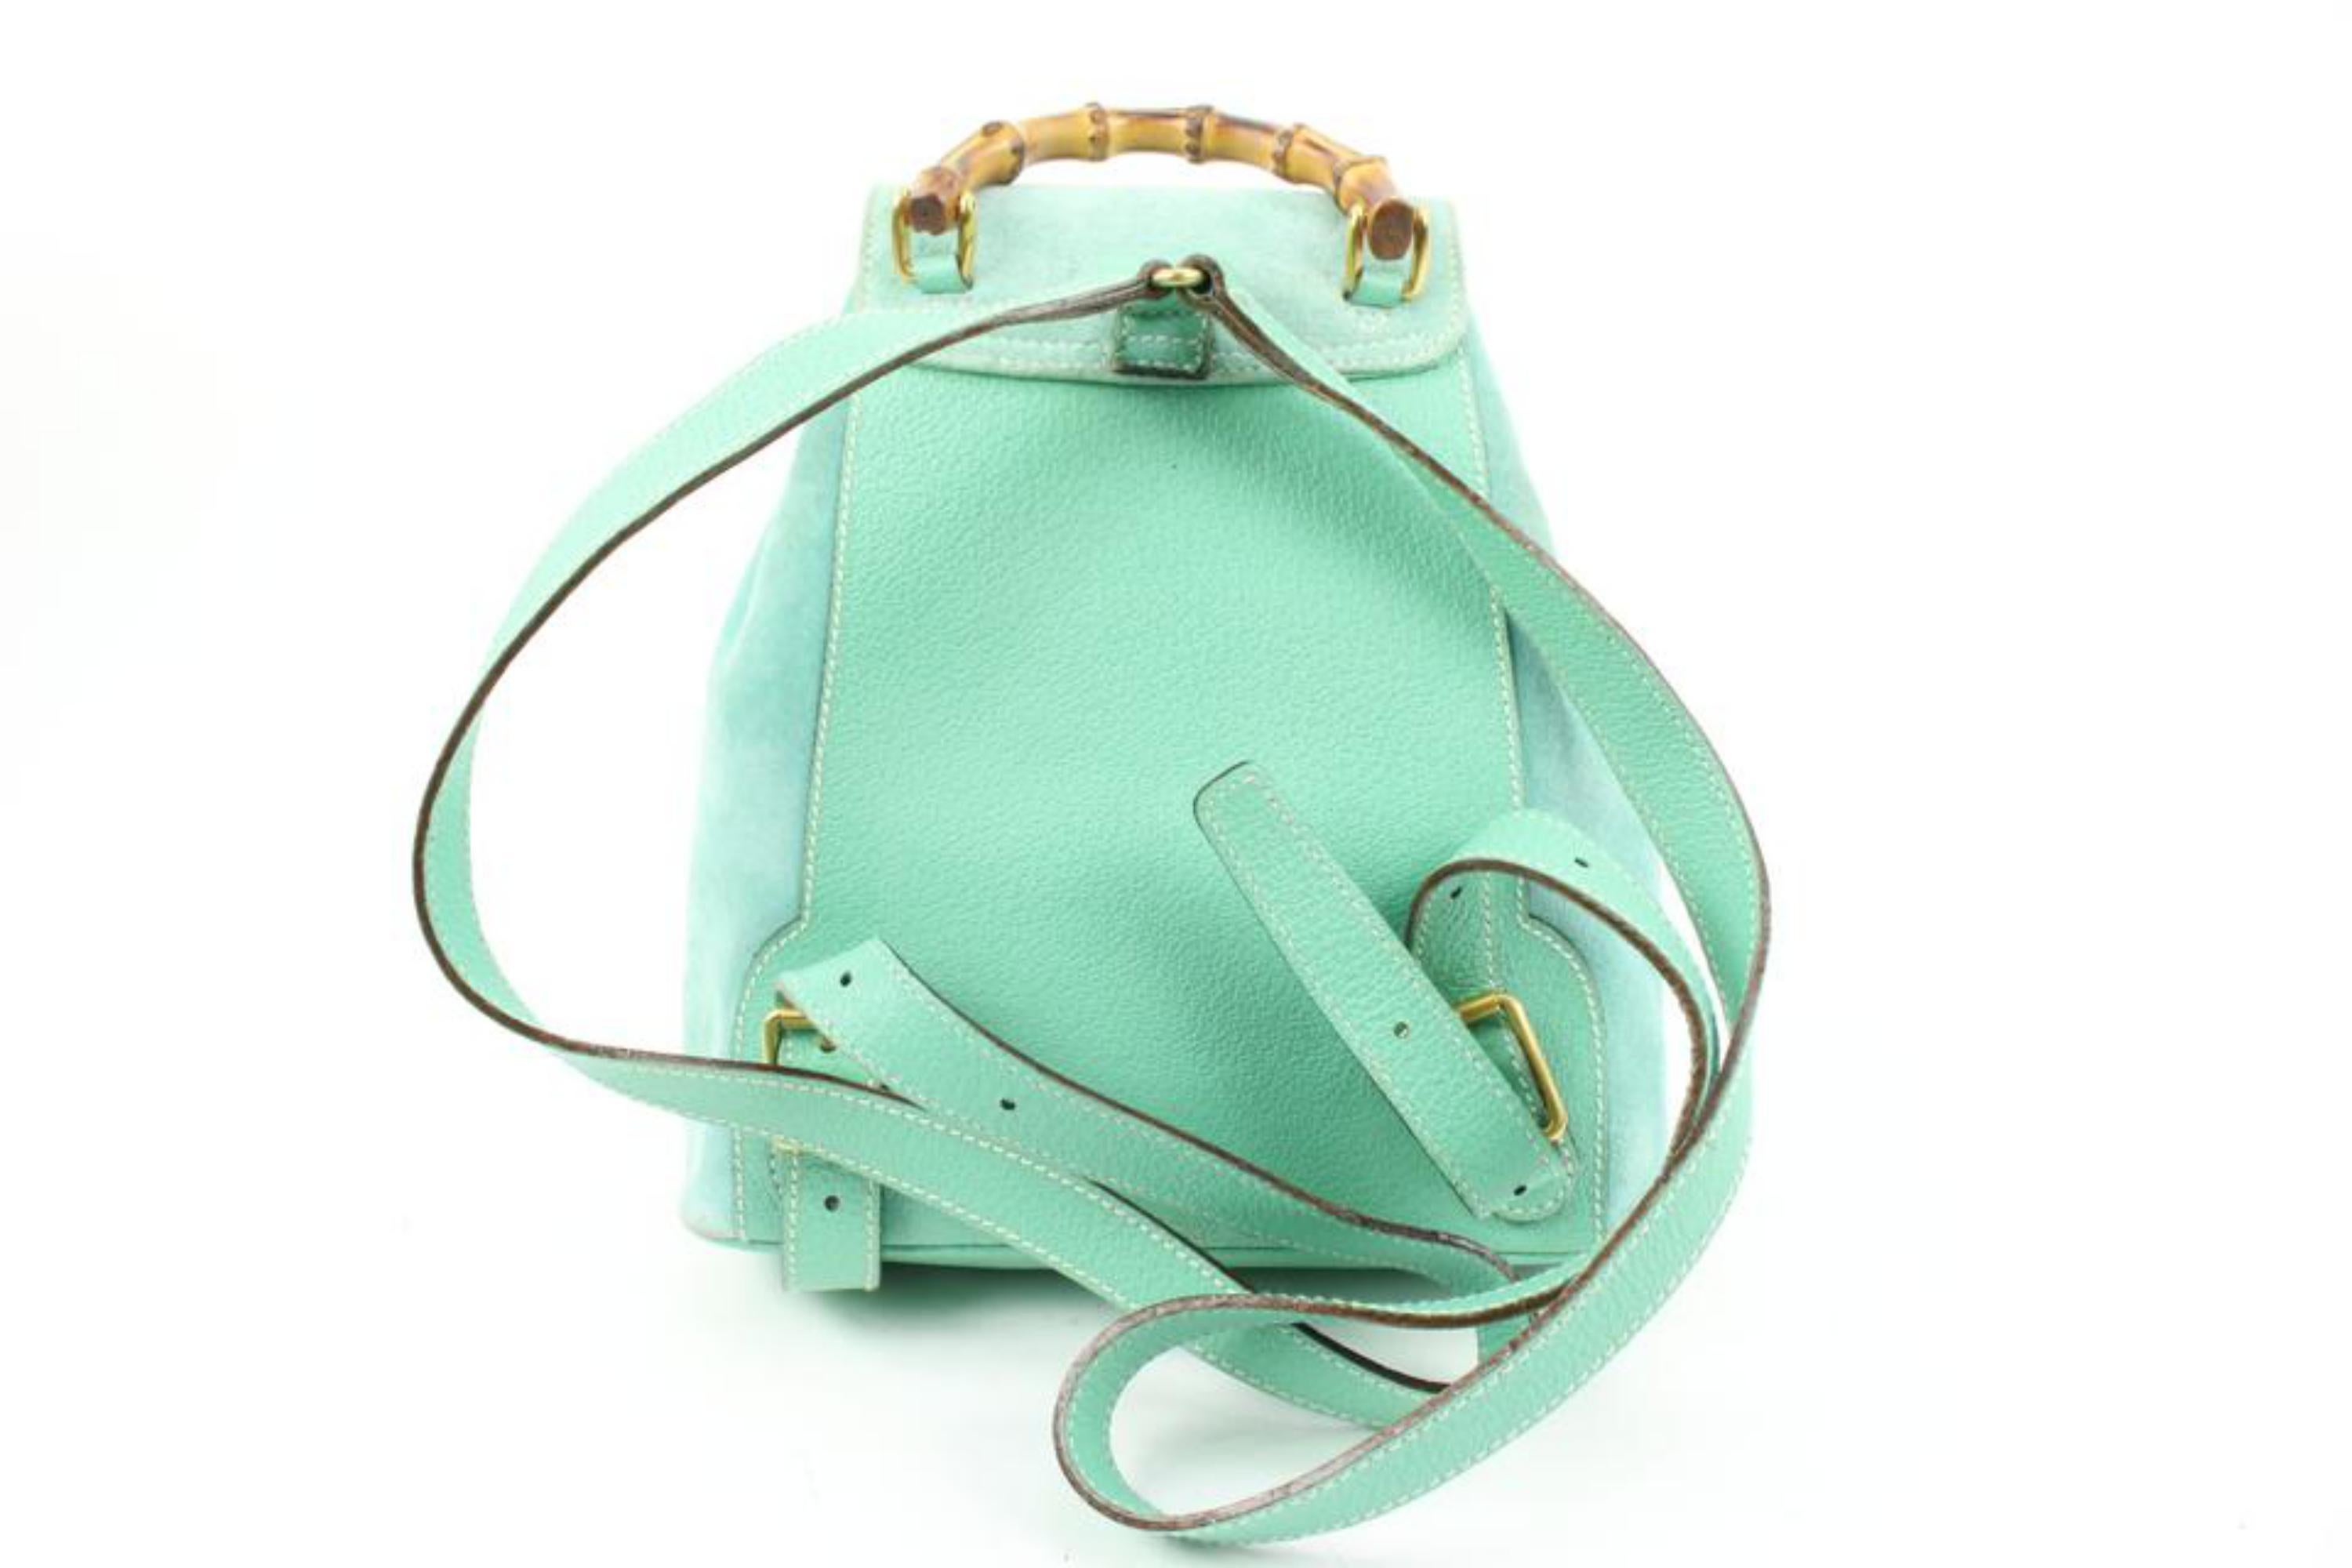 Gucci Rare Mint Green Suede Bamboo Mini Backpack 11g131s For Sale 3